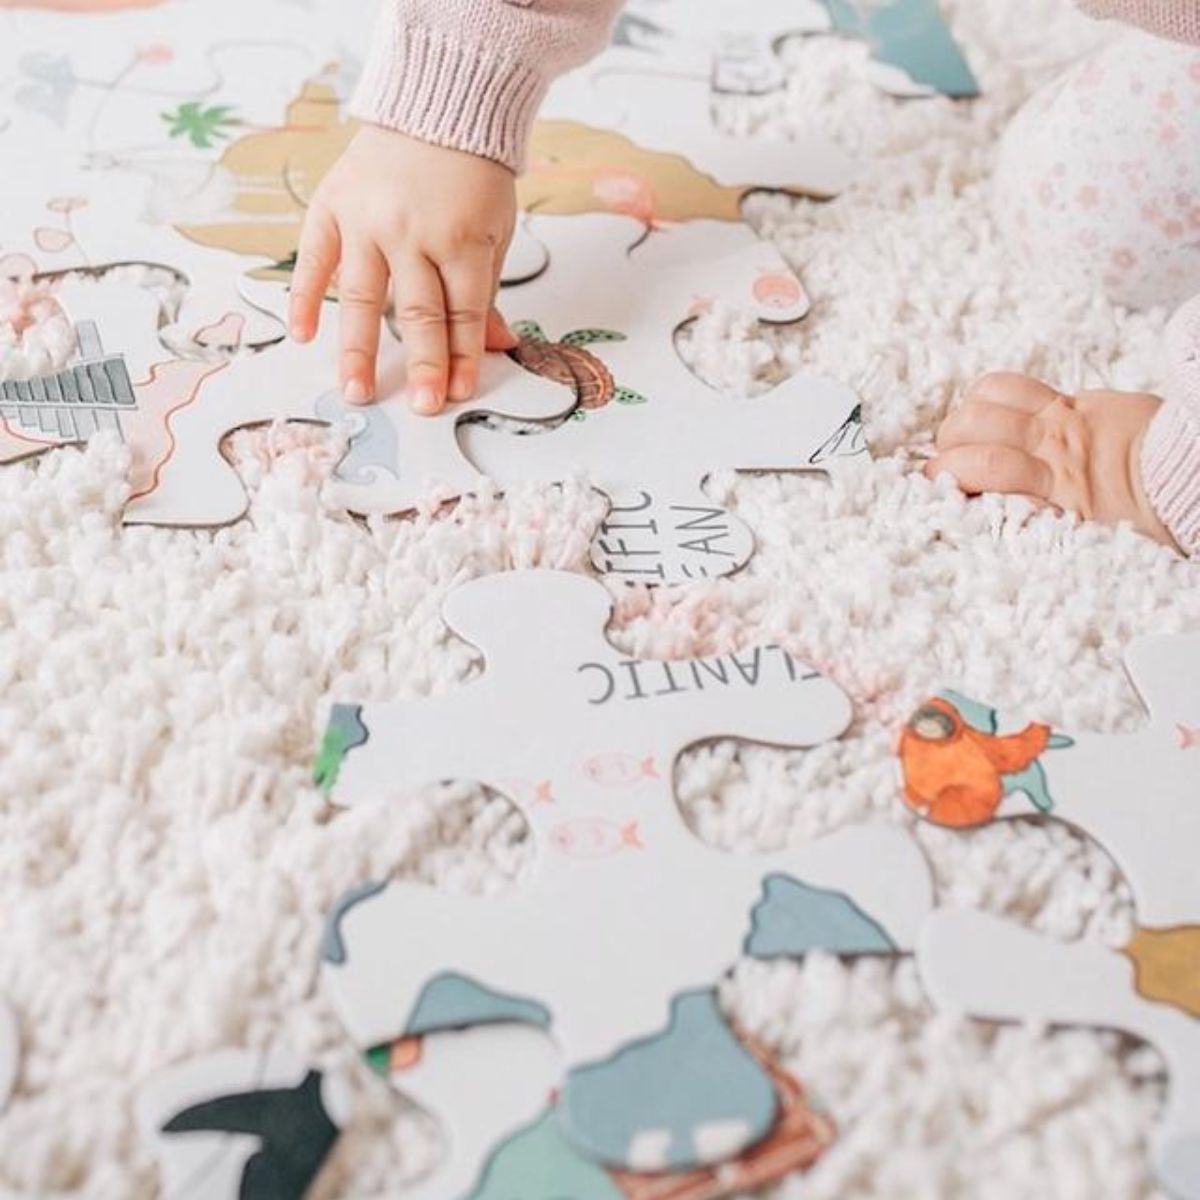 World Map Floor Puzzle - A Fun Educational Mindfulness Toy For Kids